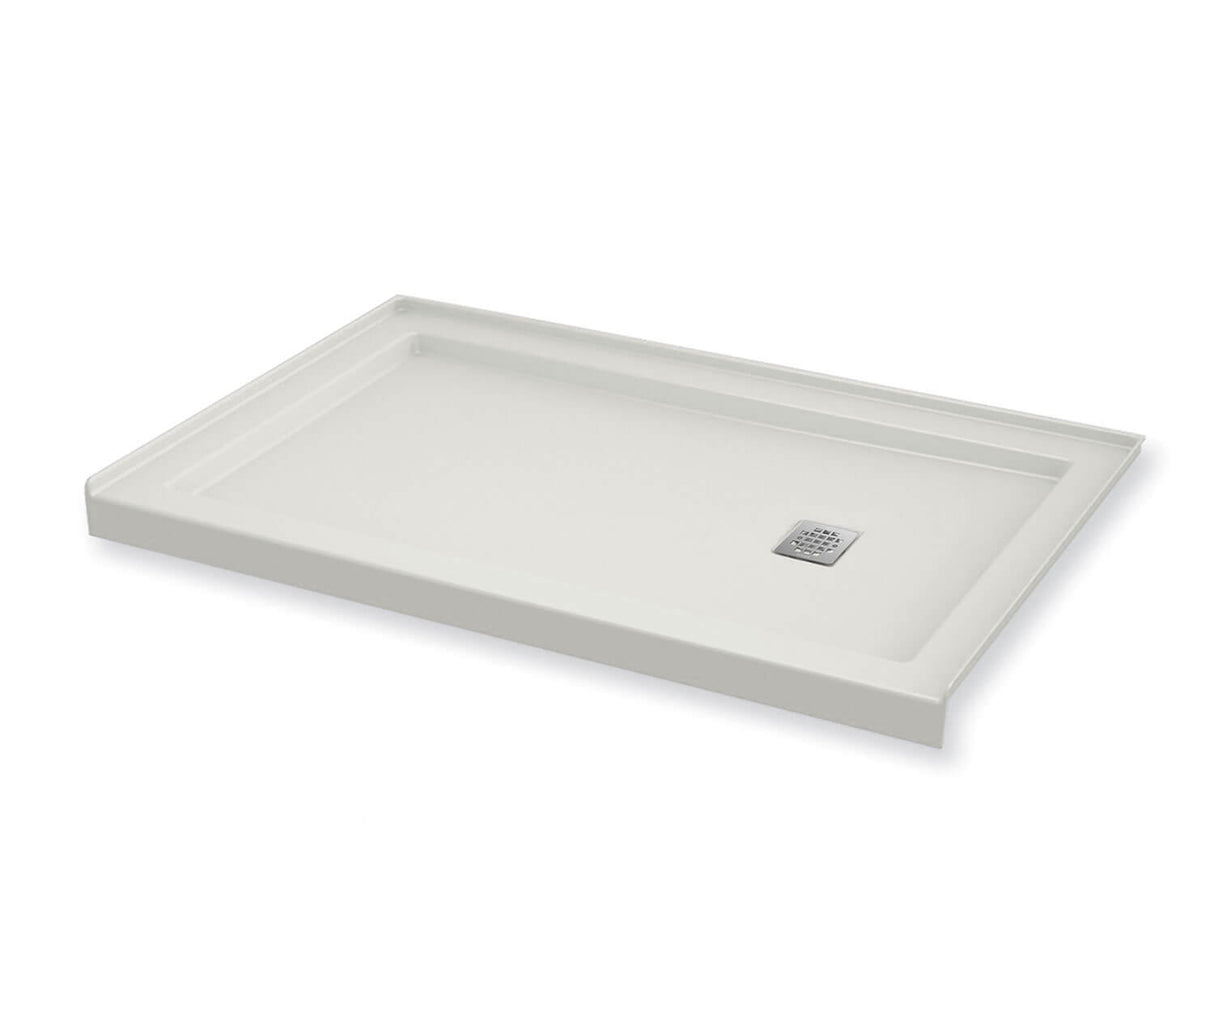 MAAX 420006-501-001-100 B3Square 6036 Acrylic Alcove Shower Base in White with Left-Hand Drain